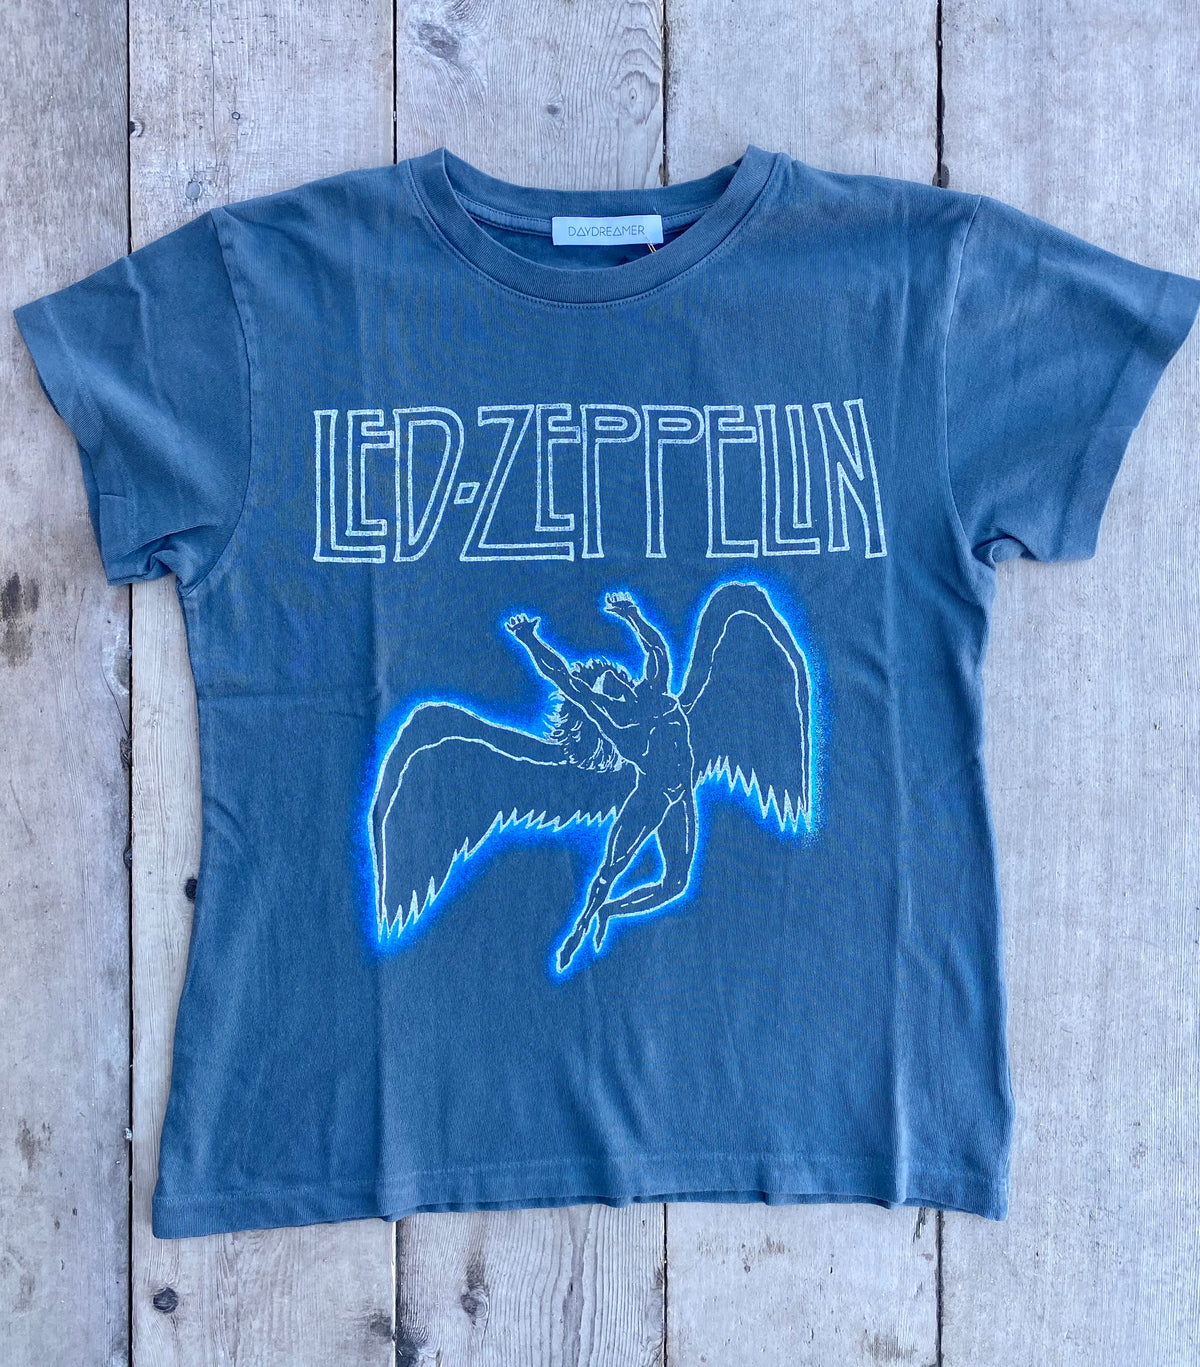 LED ZEPPELIN 1984 GLOWING ICARUS TOUR TEE